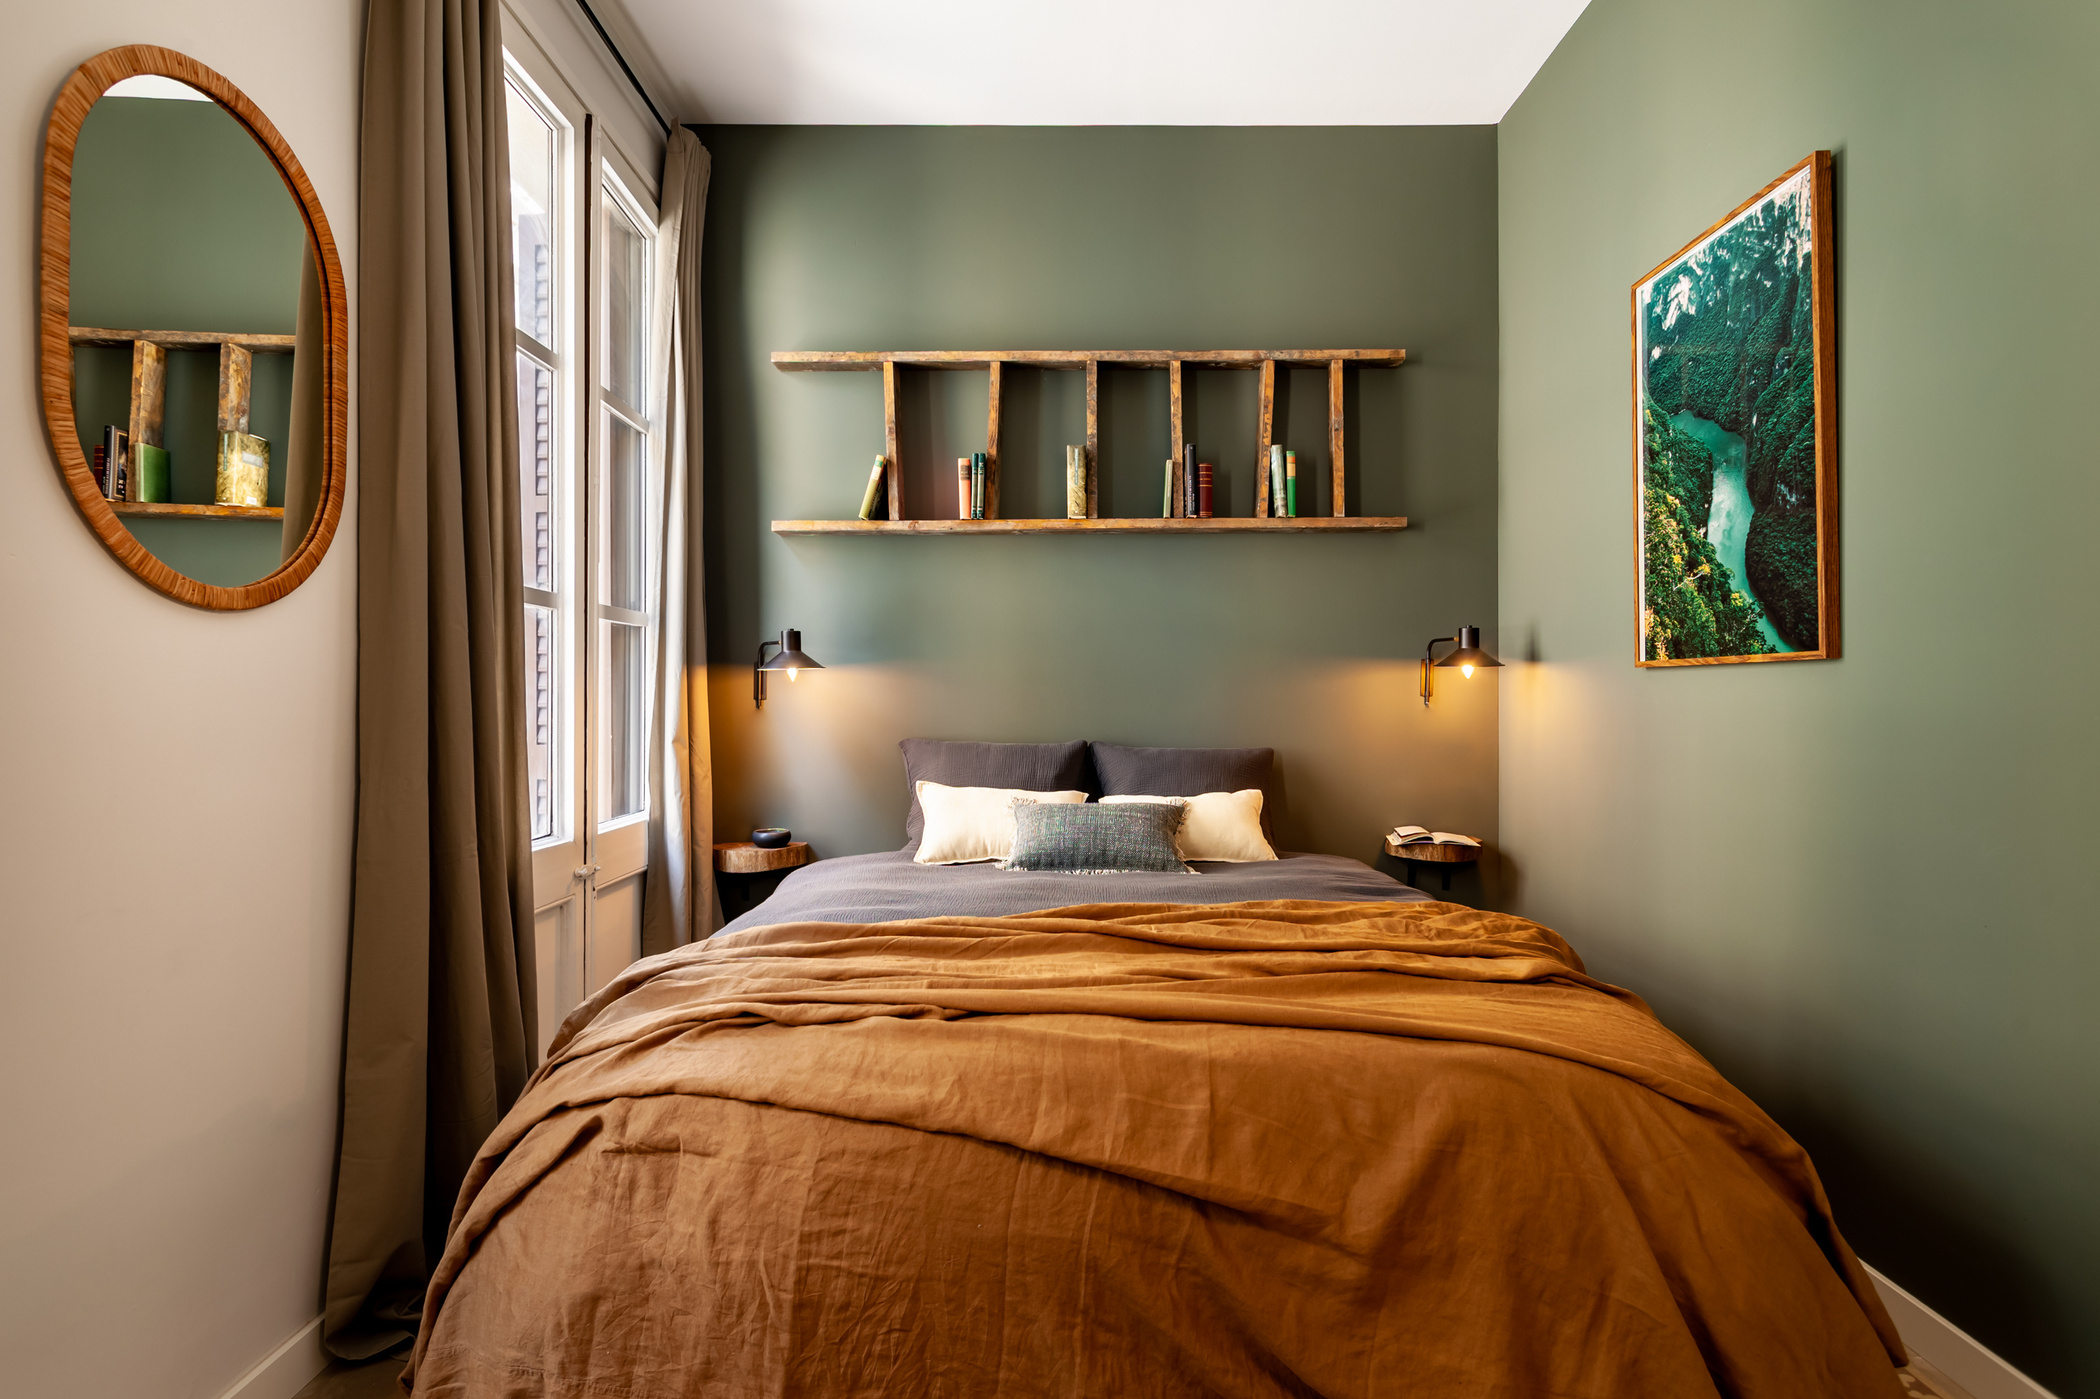 a bedroom with green walls and brown bedding. Green bedroom walls, cozy bedroom design, mirror in bedroom, oval shaped mirror, black wall lights, pillows on bed, blanket on bed. Barcelona Interior design, Amsterdam interior design, Aptó interiors